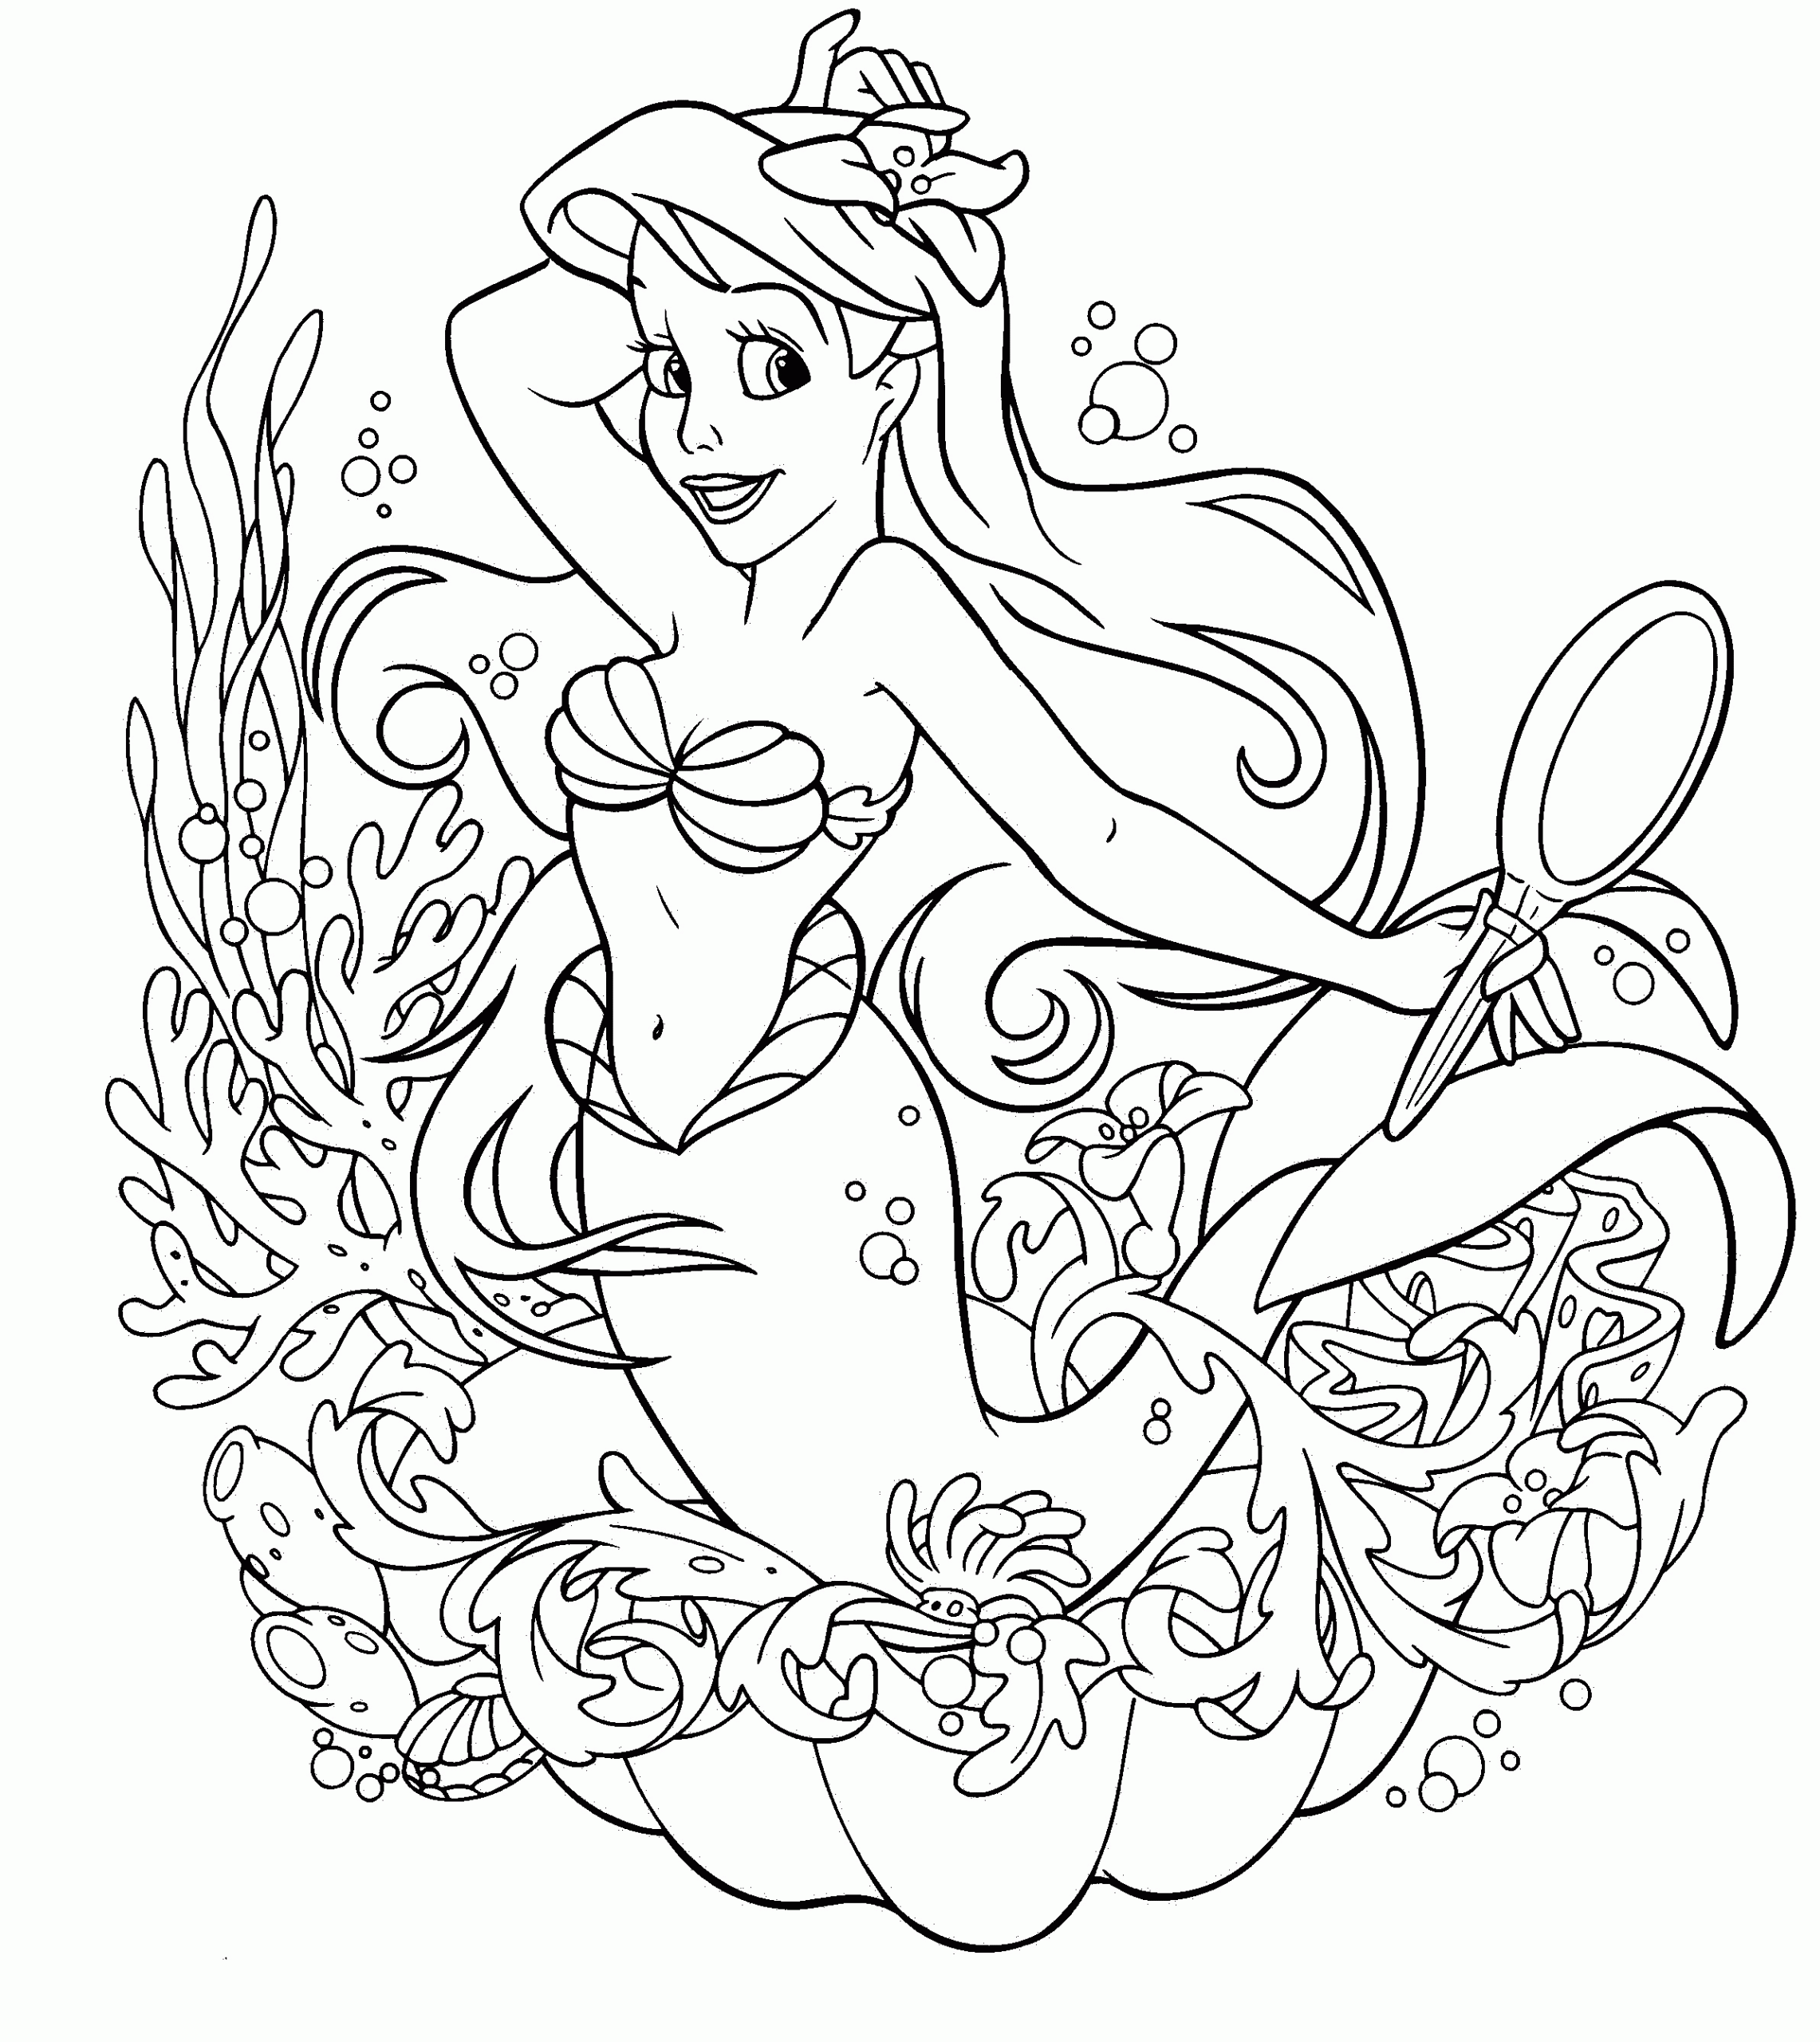 1000 Coloring Pages For Girls
 1000 images about Colouring on Pinterest